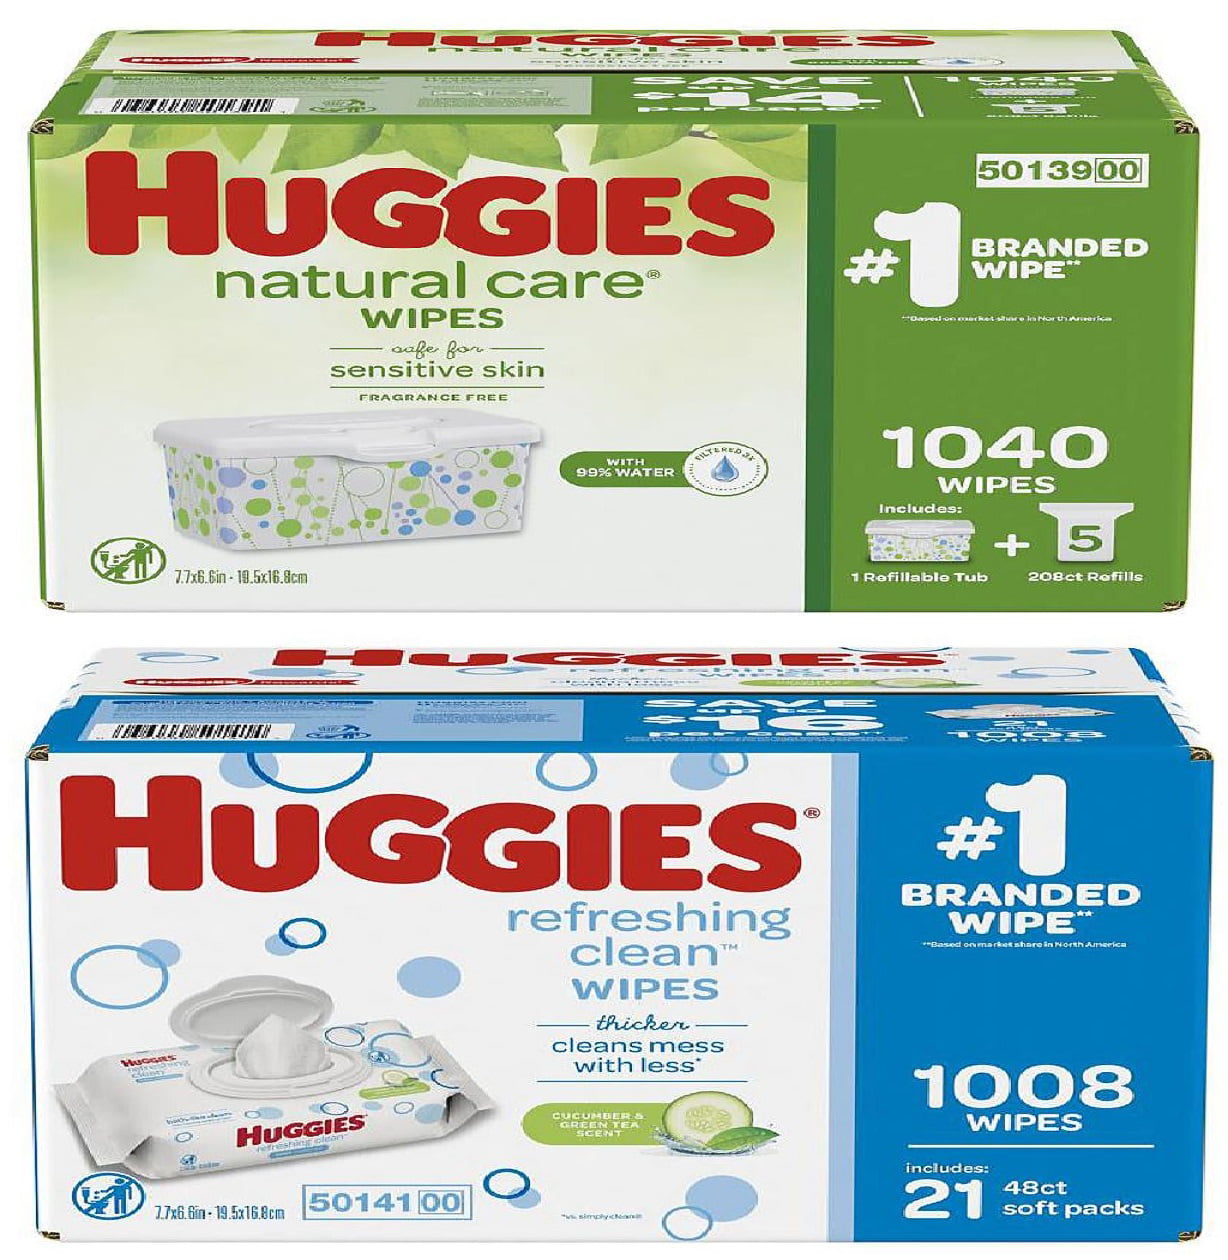 HUGGIES Refreshing Clean Baby Wipes 1 Refillable Pop-up Tub 